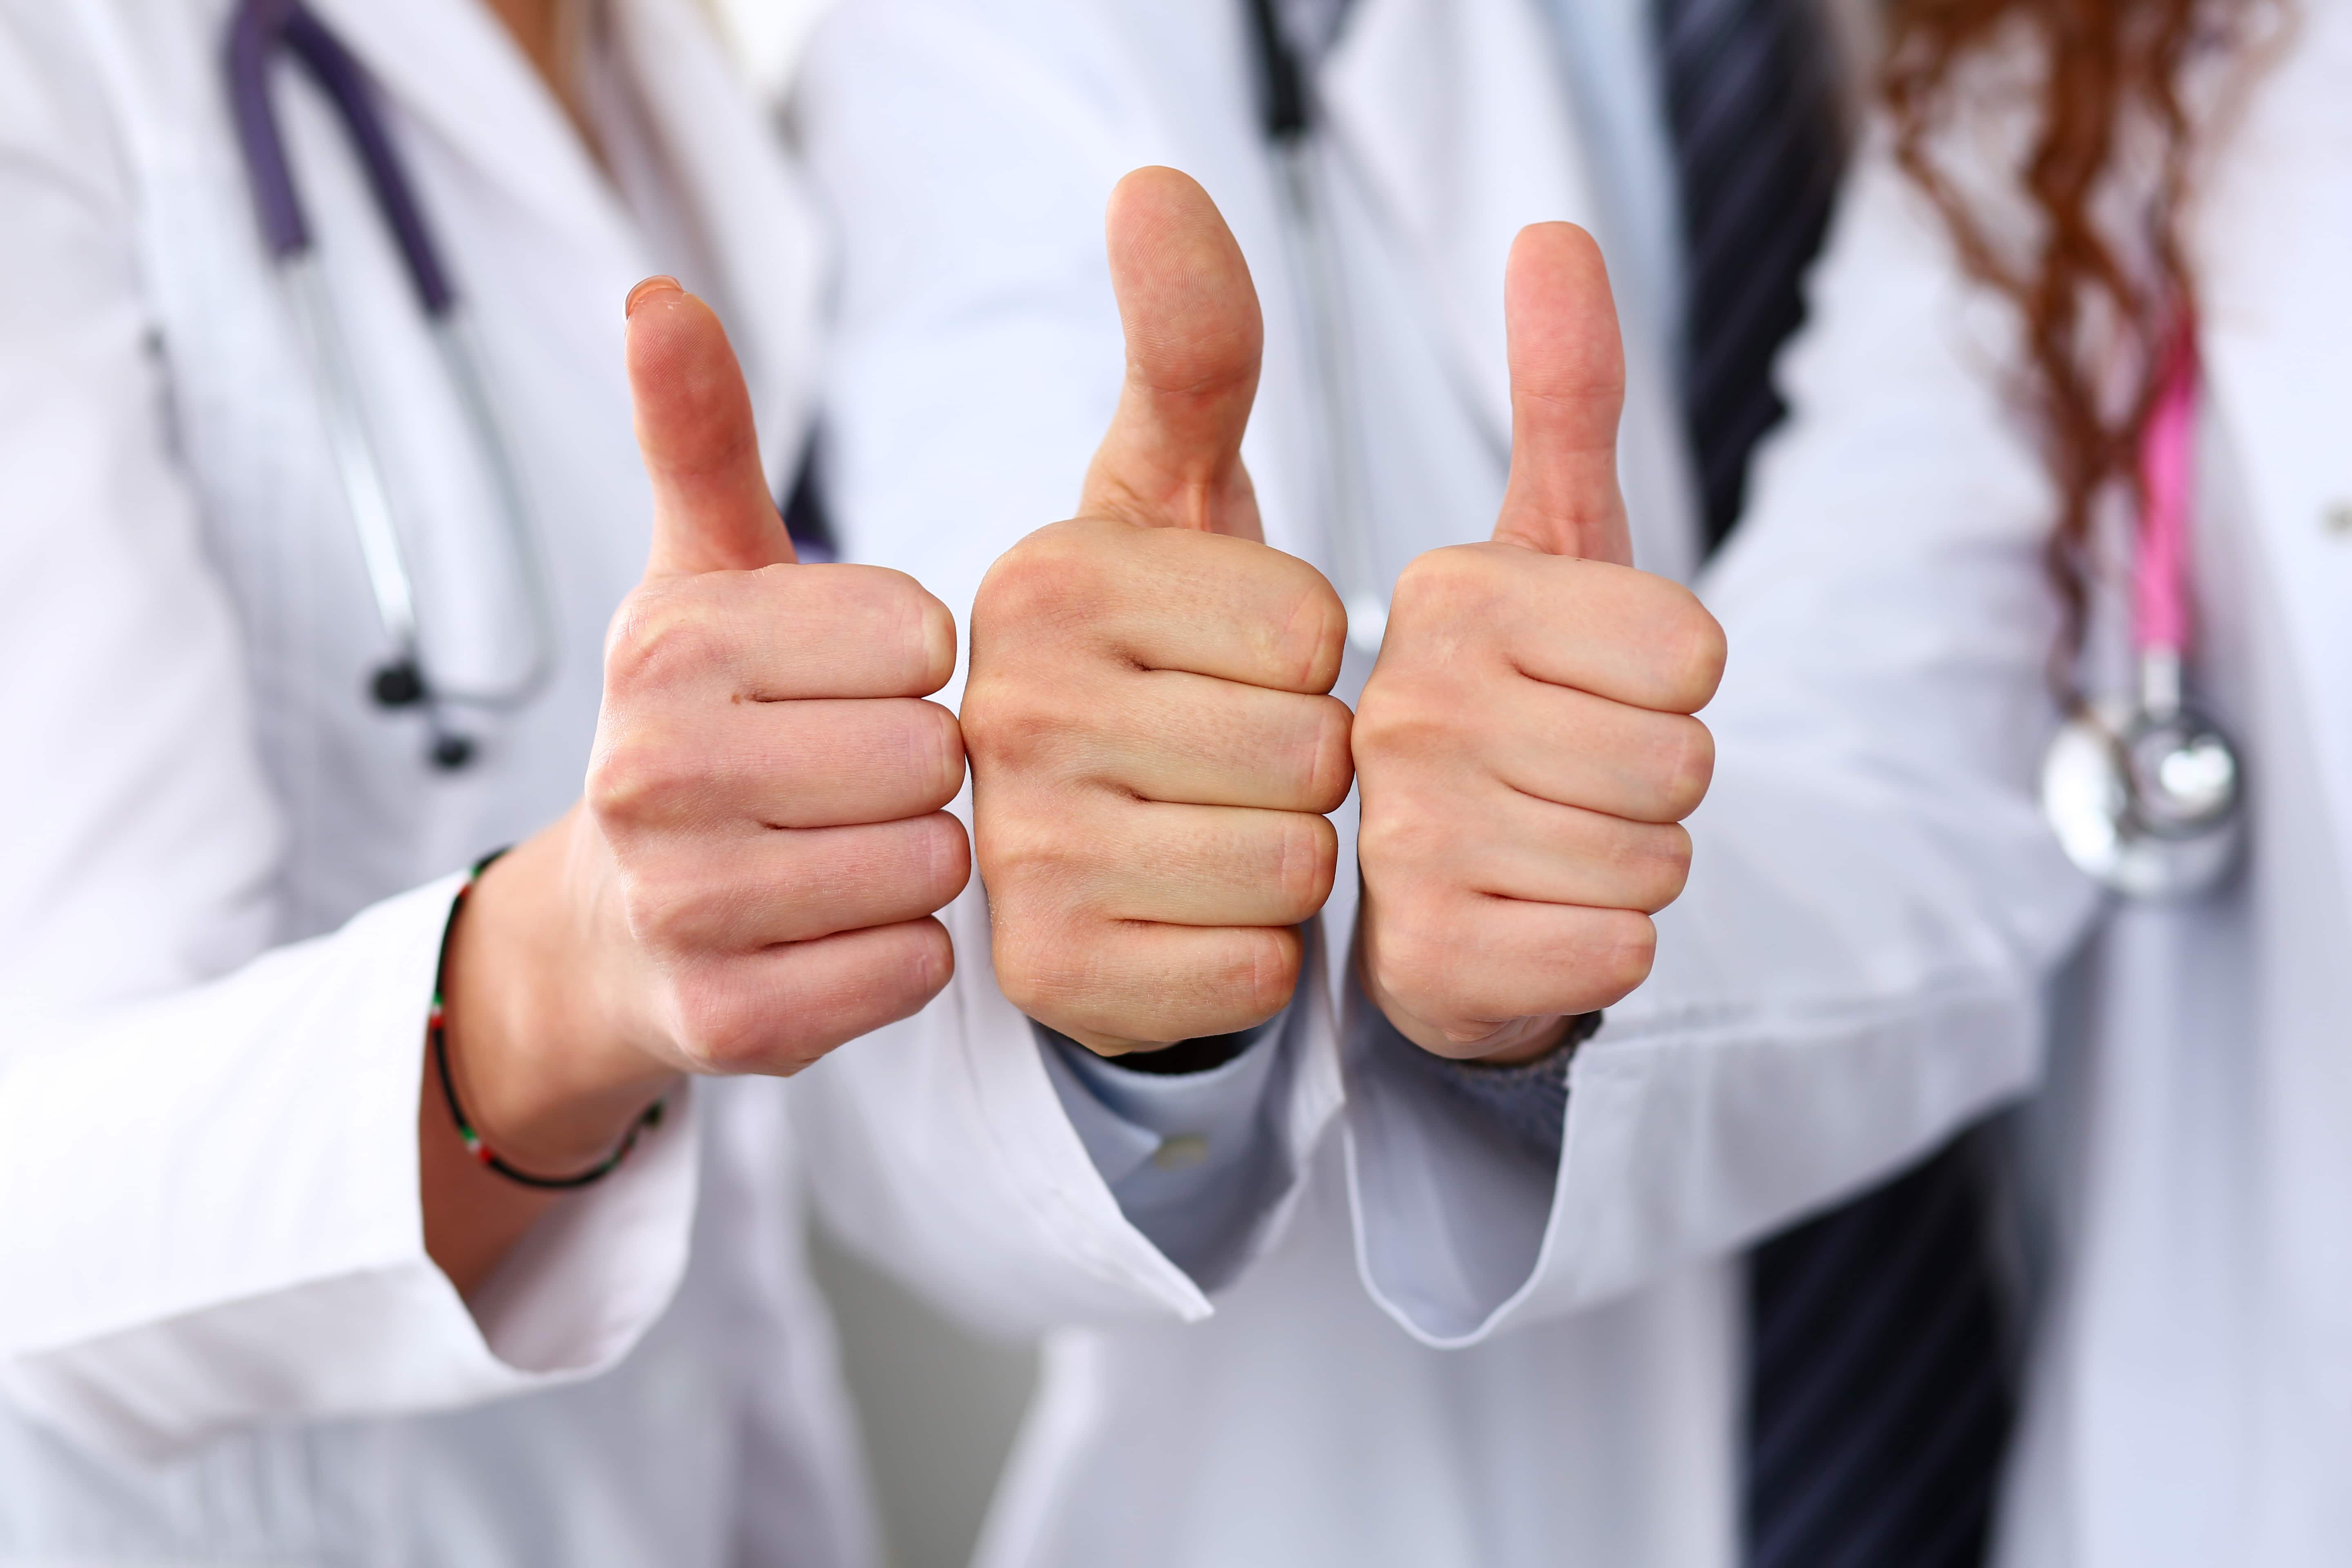 Three thumbs up for group medical practice. Learn the dos and don'ts of starting a group practice.